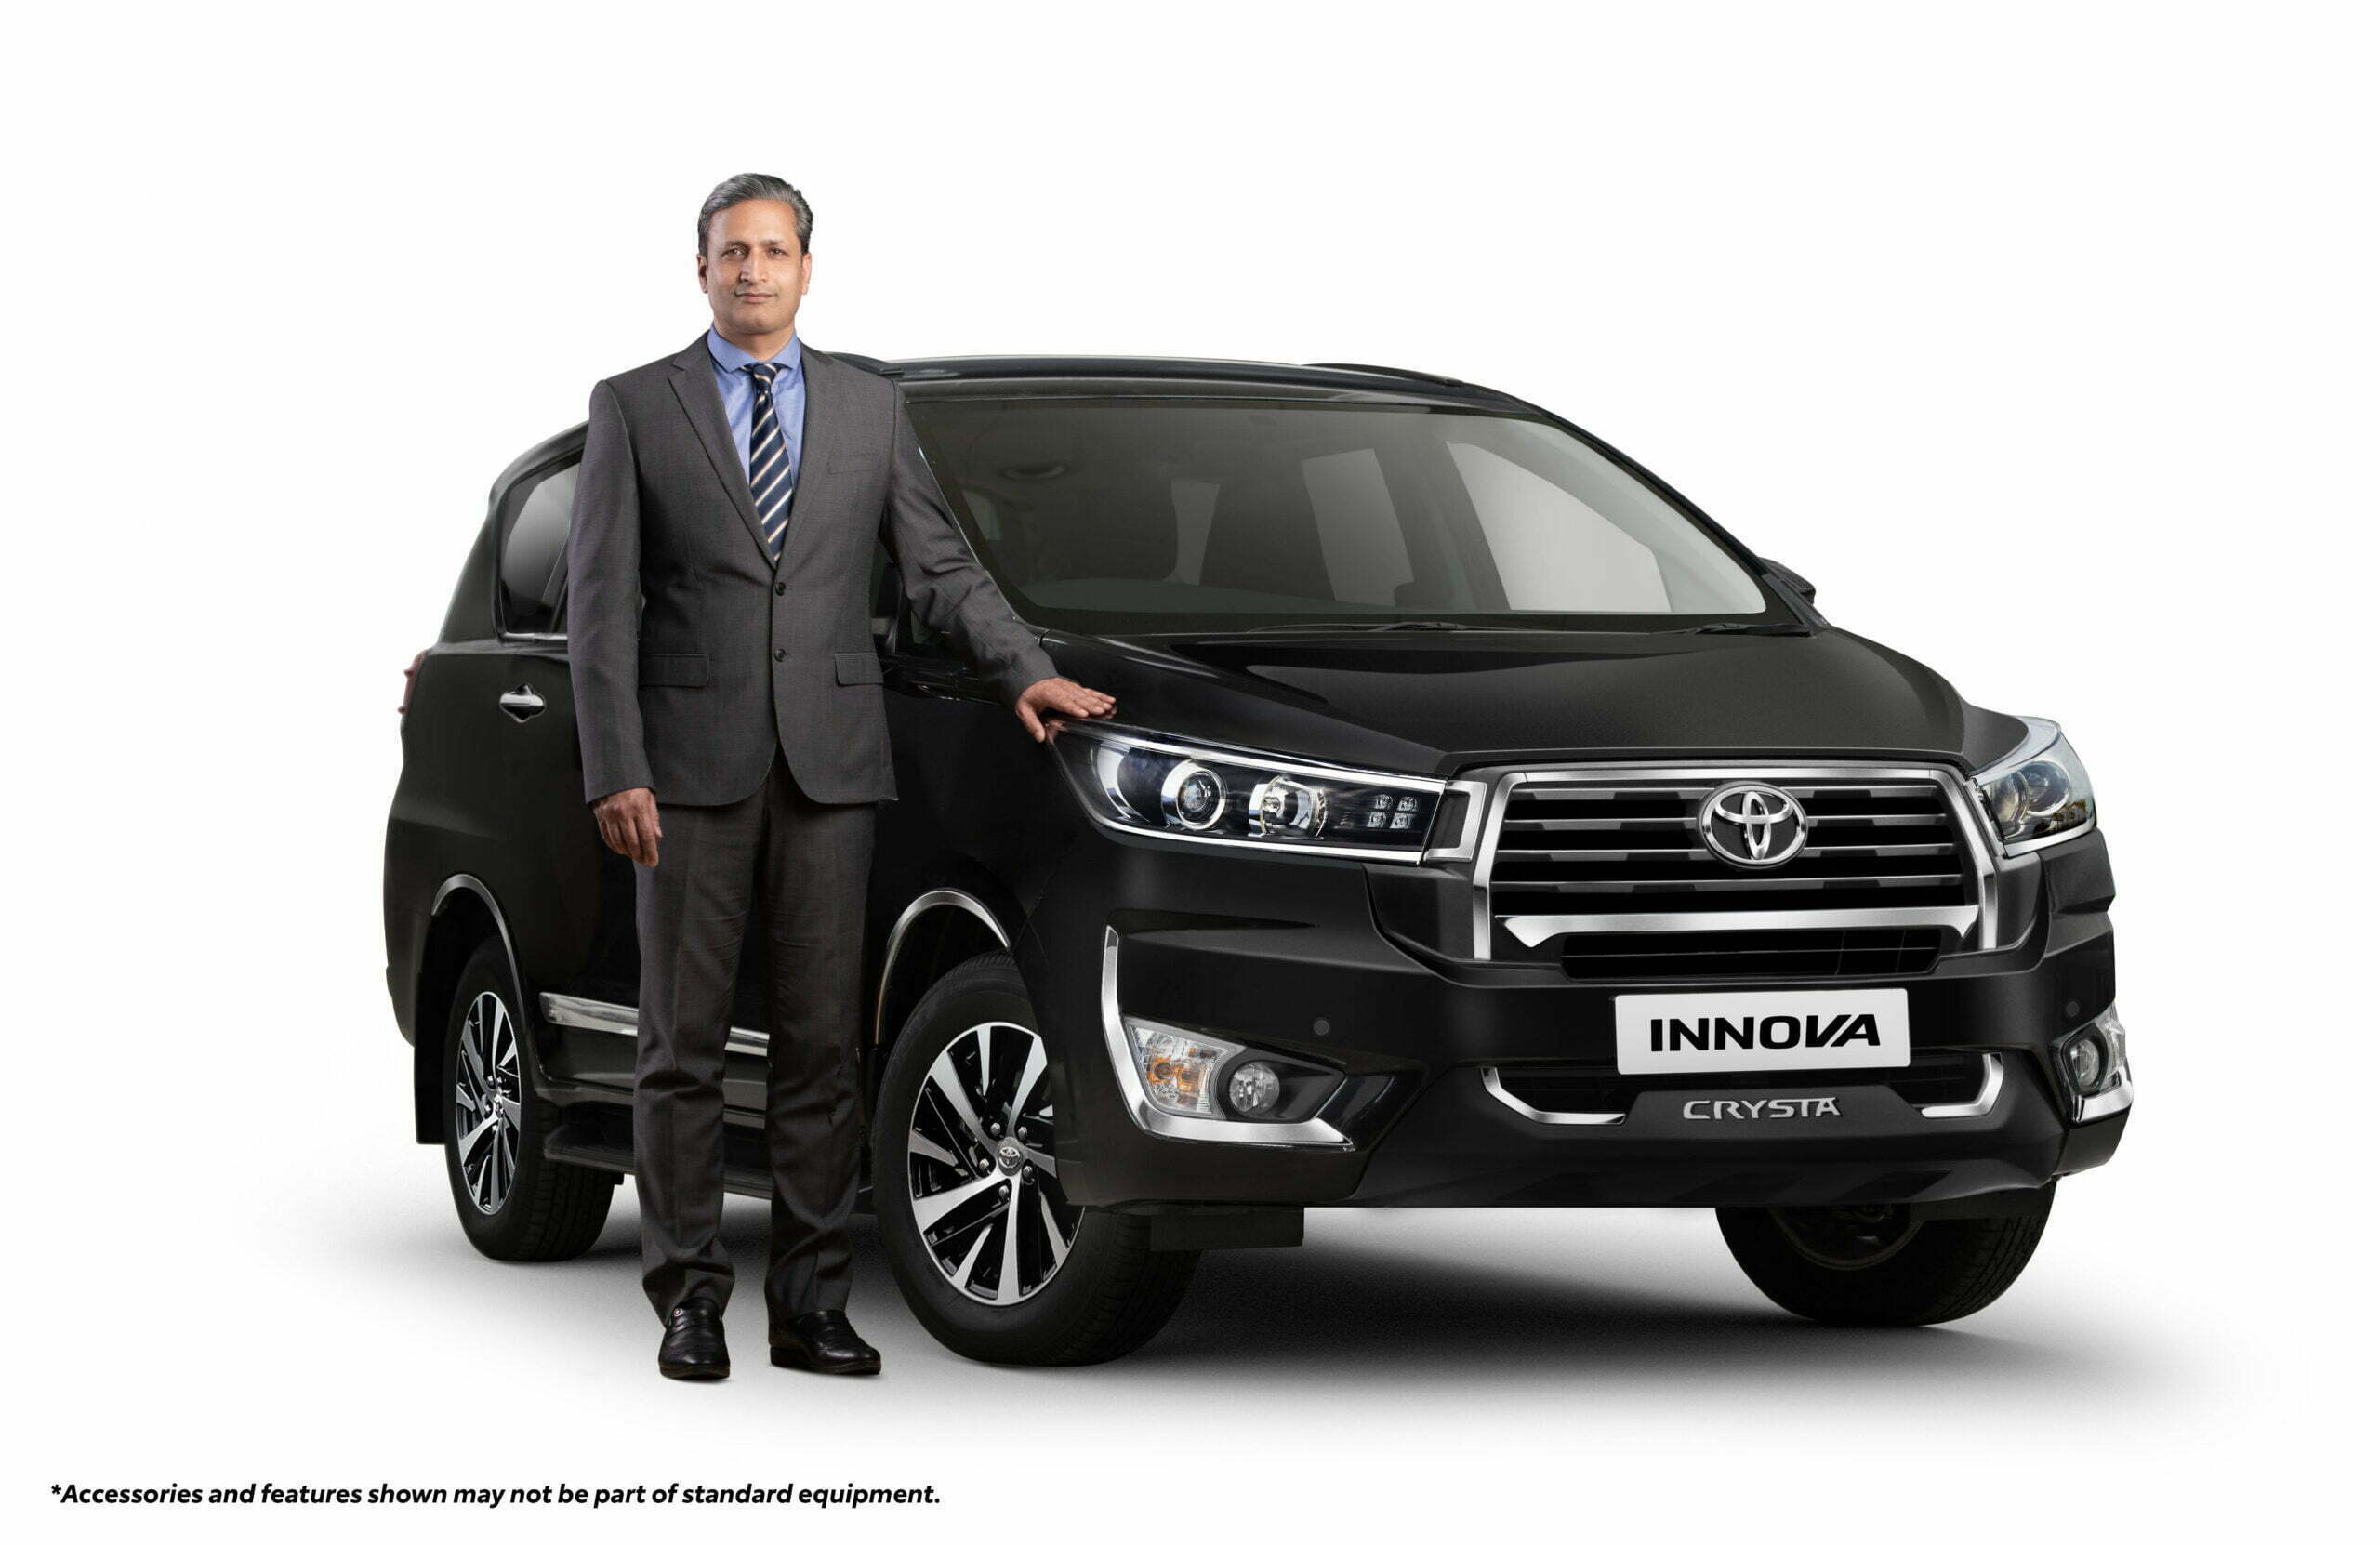 2023 Toyota Innova Diesel Bookings Reopen For Rs 50,000